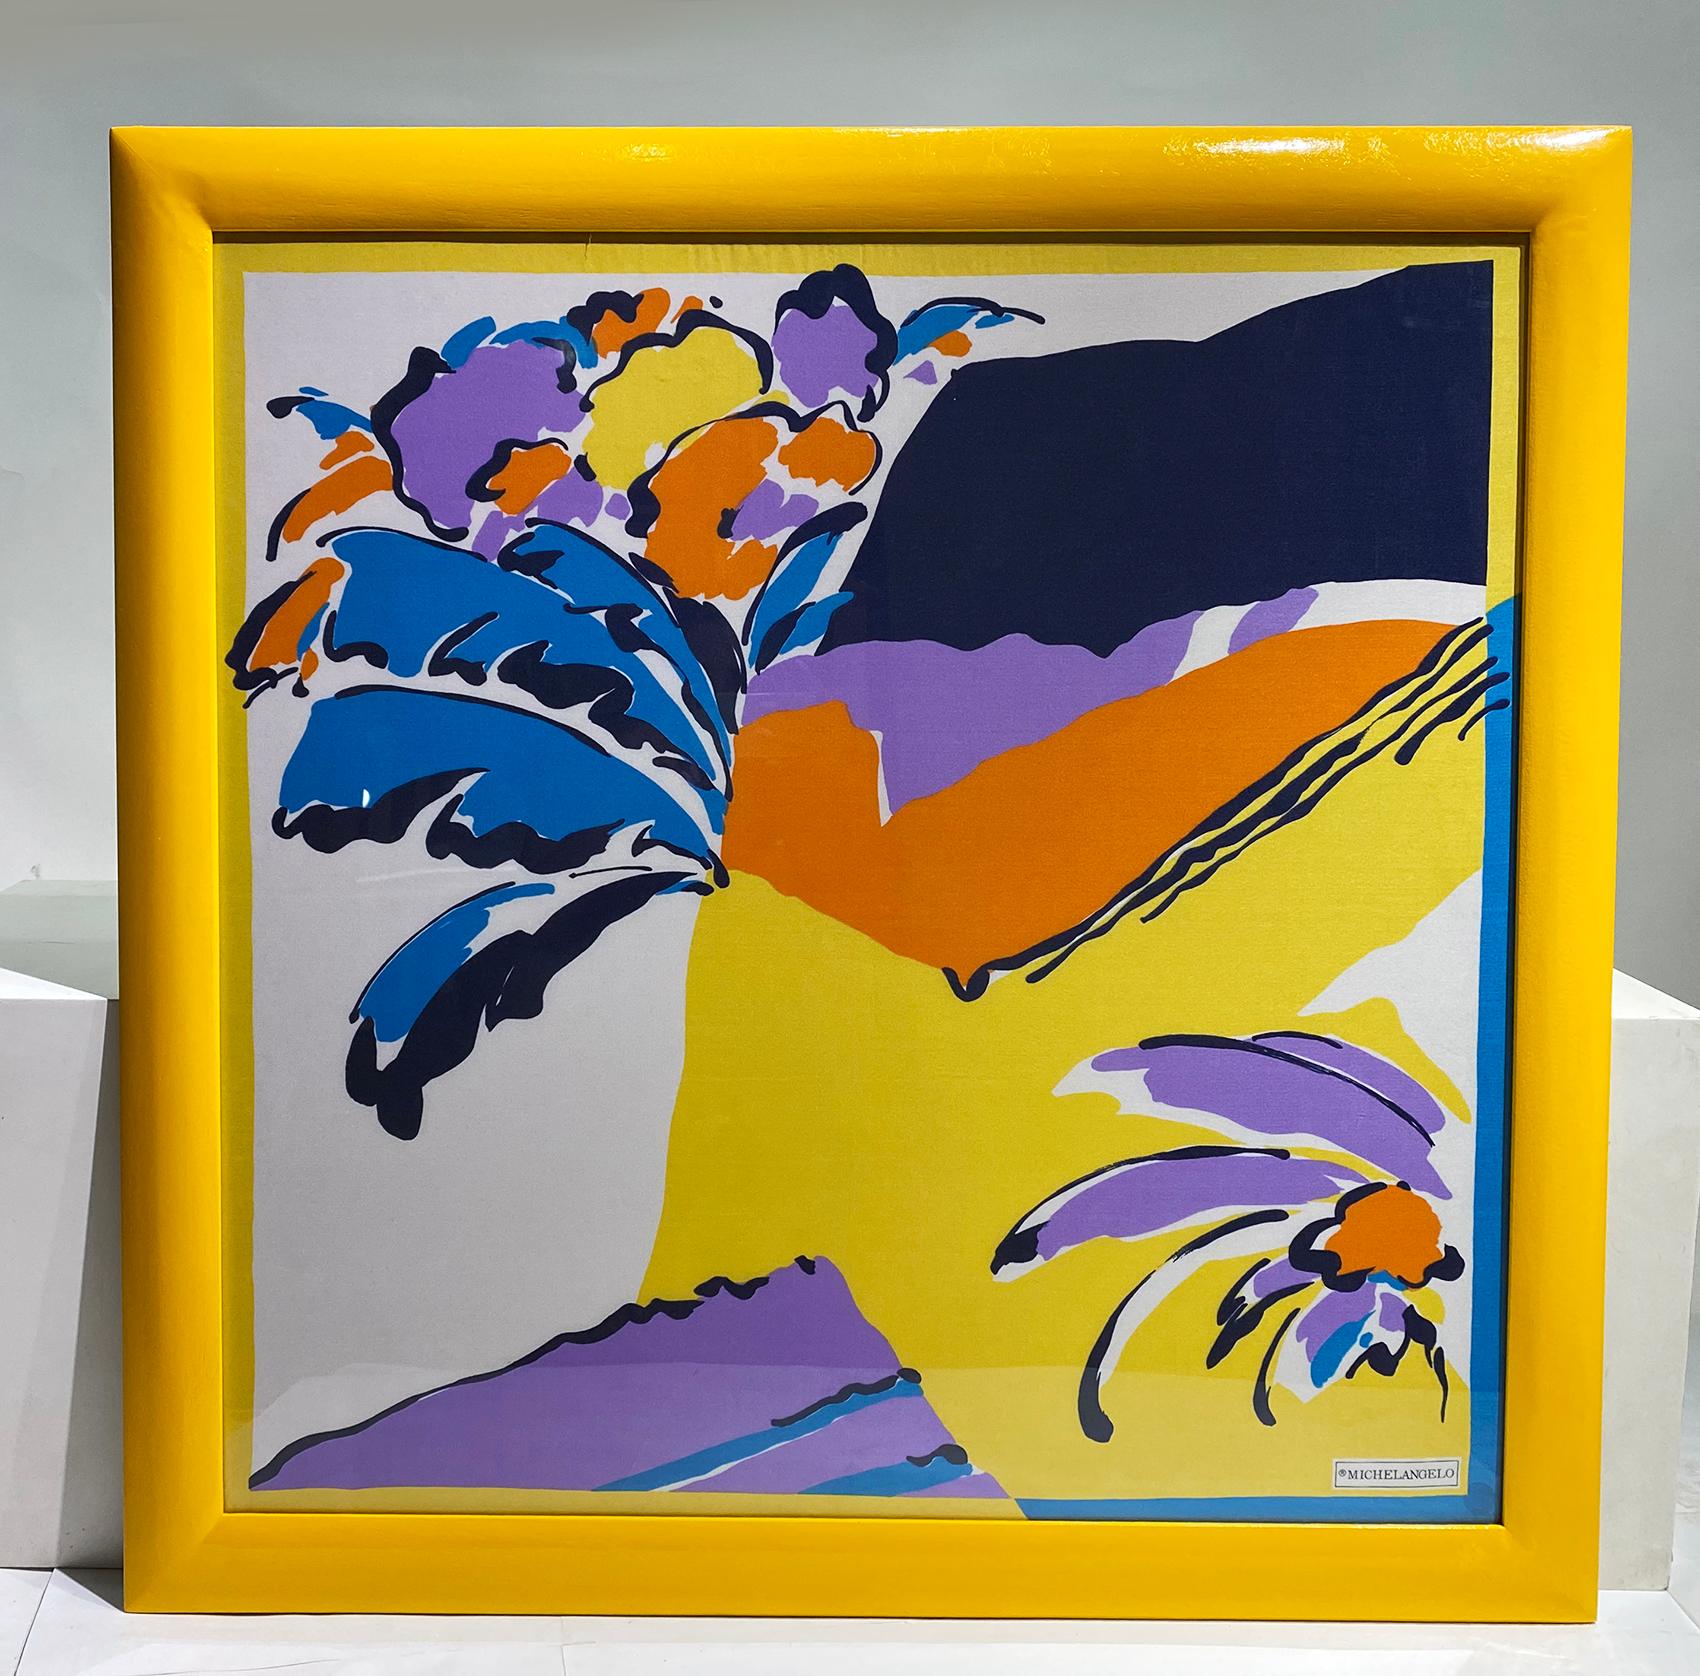 Large colorful scarf, with vivid colors 
Having the signature of the artist Michelangelo on the bottom left corner with a beautiful yellow frame.
Covered with plexiglass on the front with the scarf stretched on white Masonite wood.